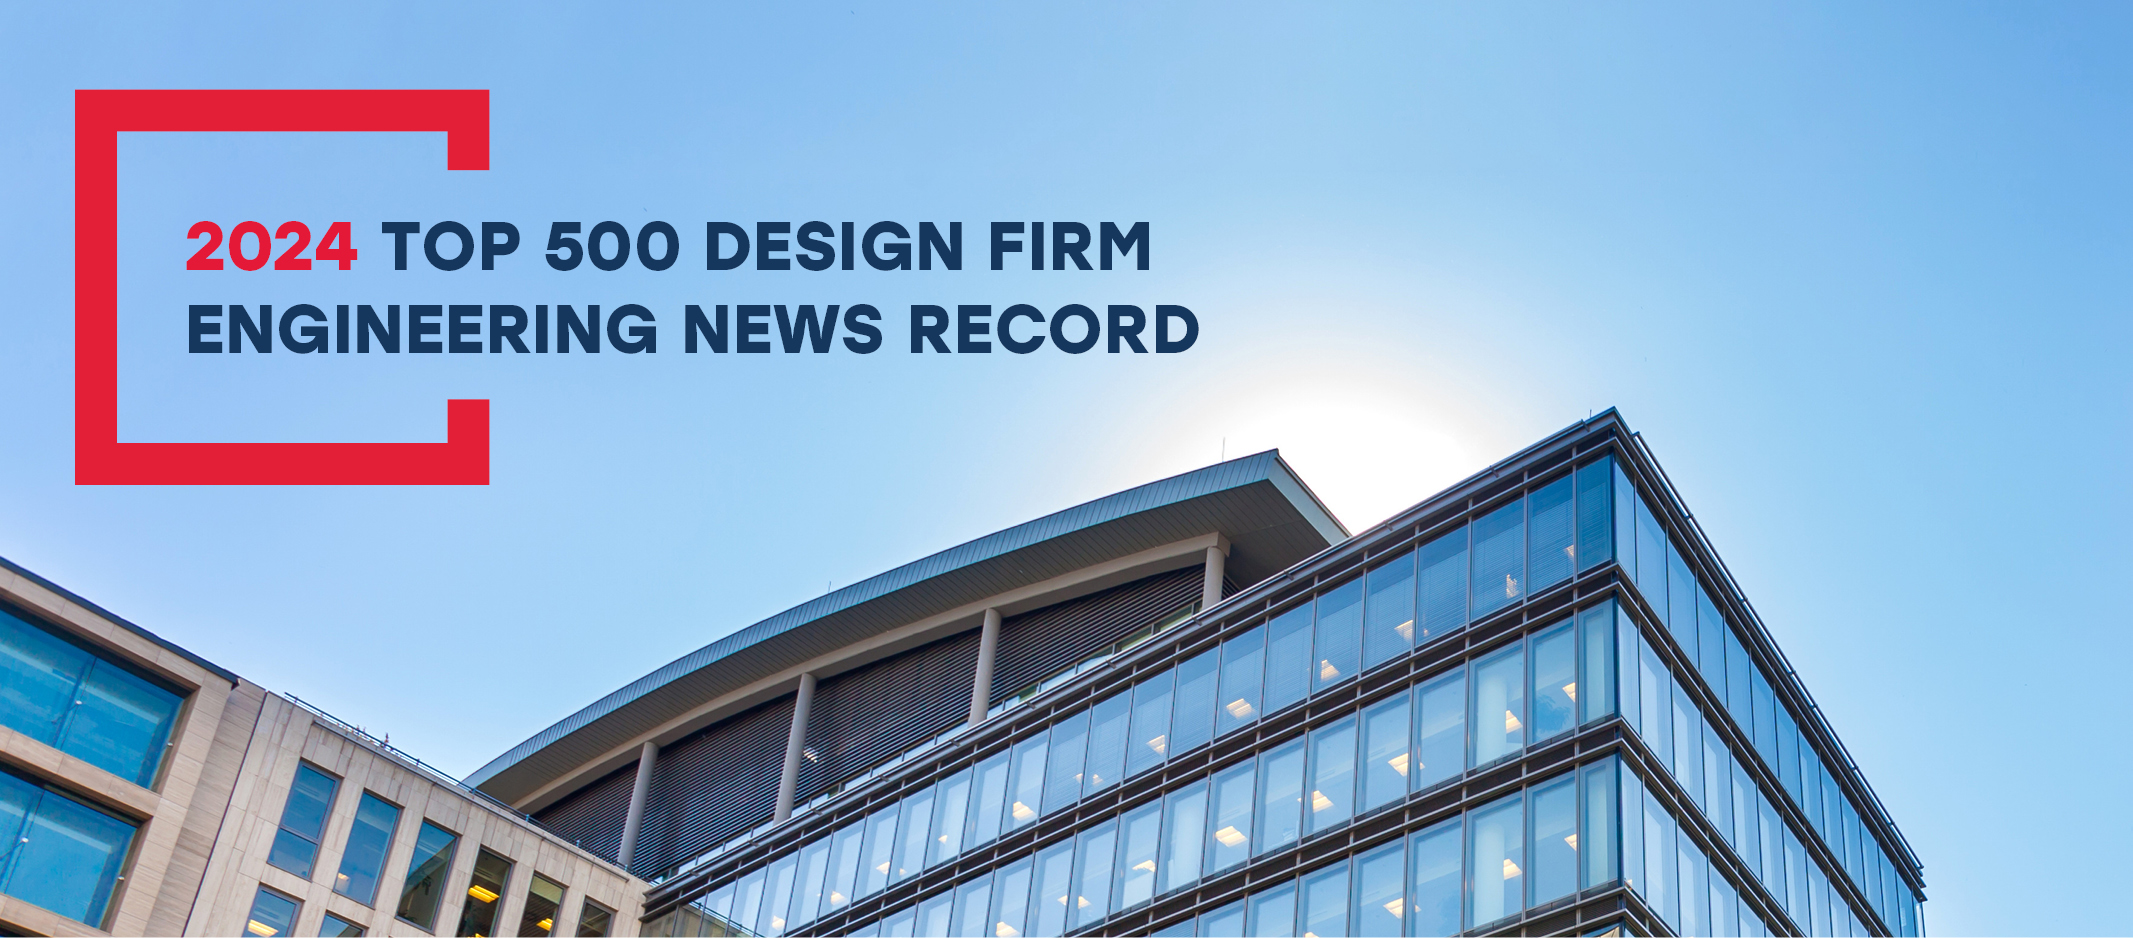 building with 2024 top 500 design firm on engineering news record on top